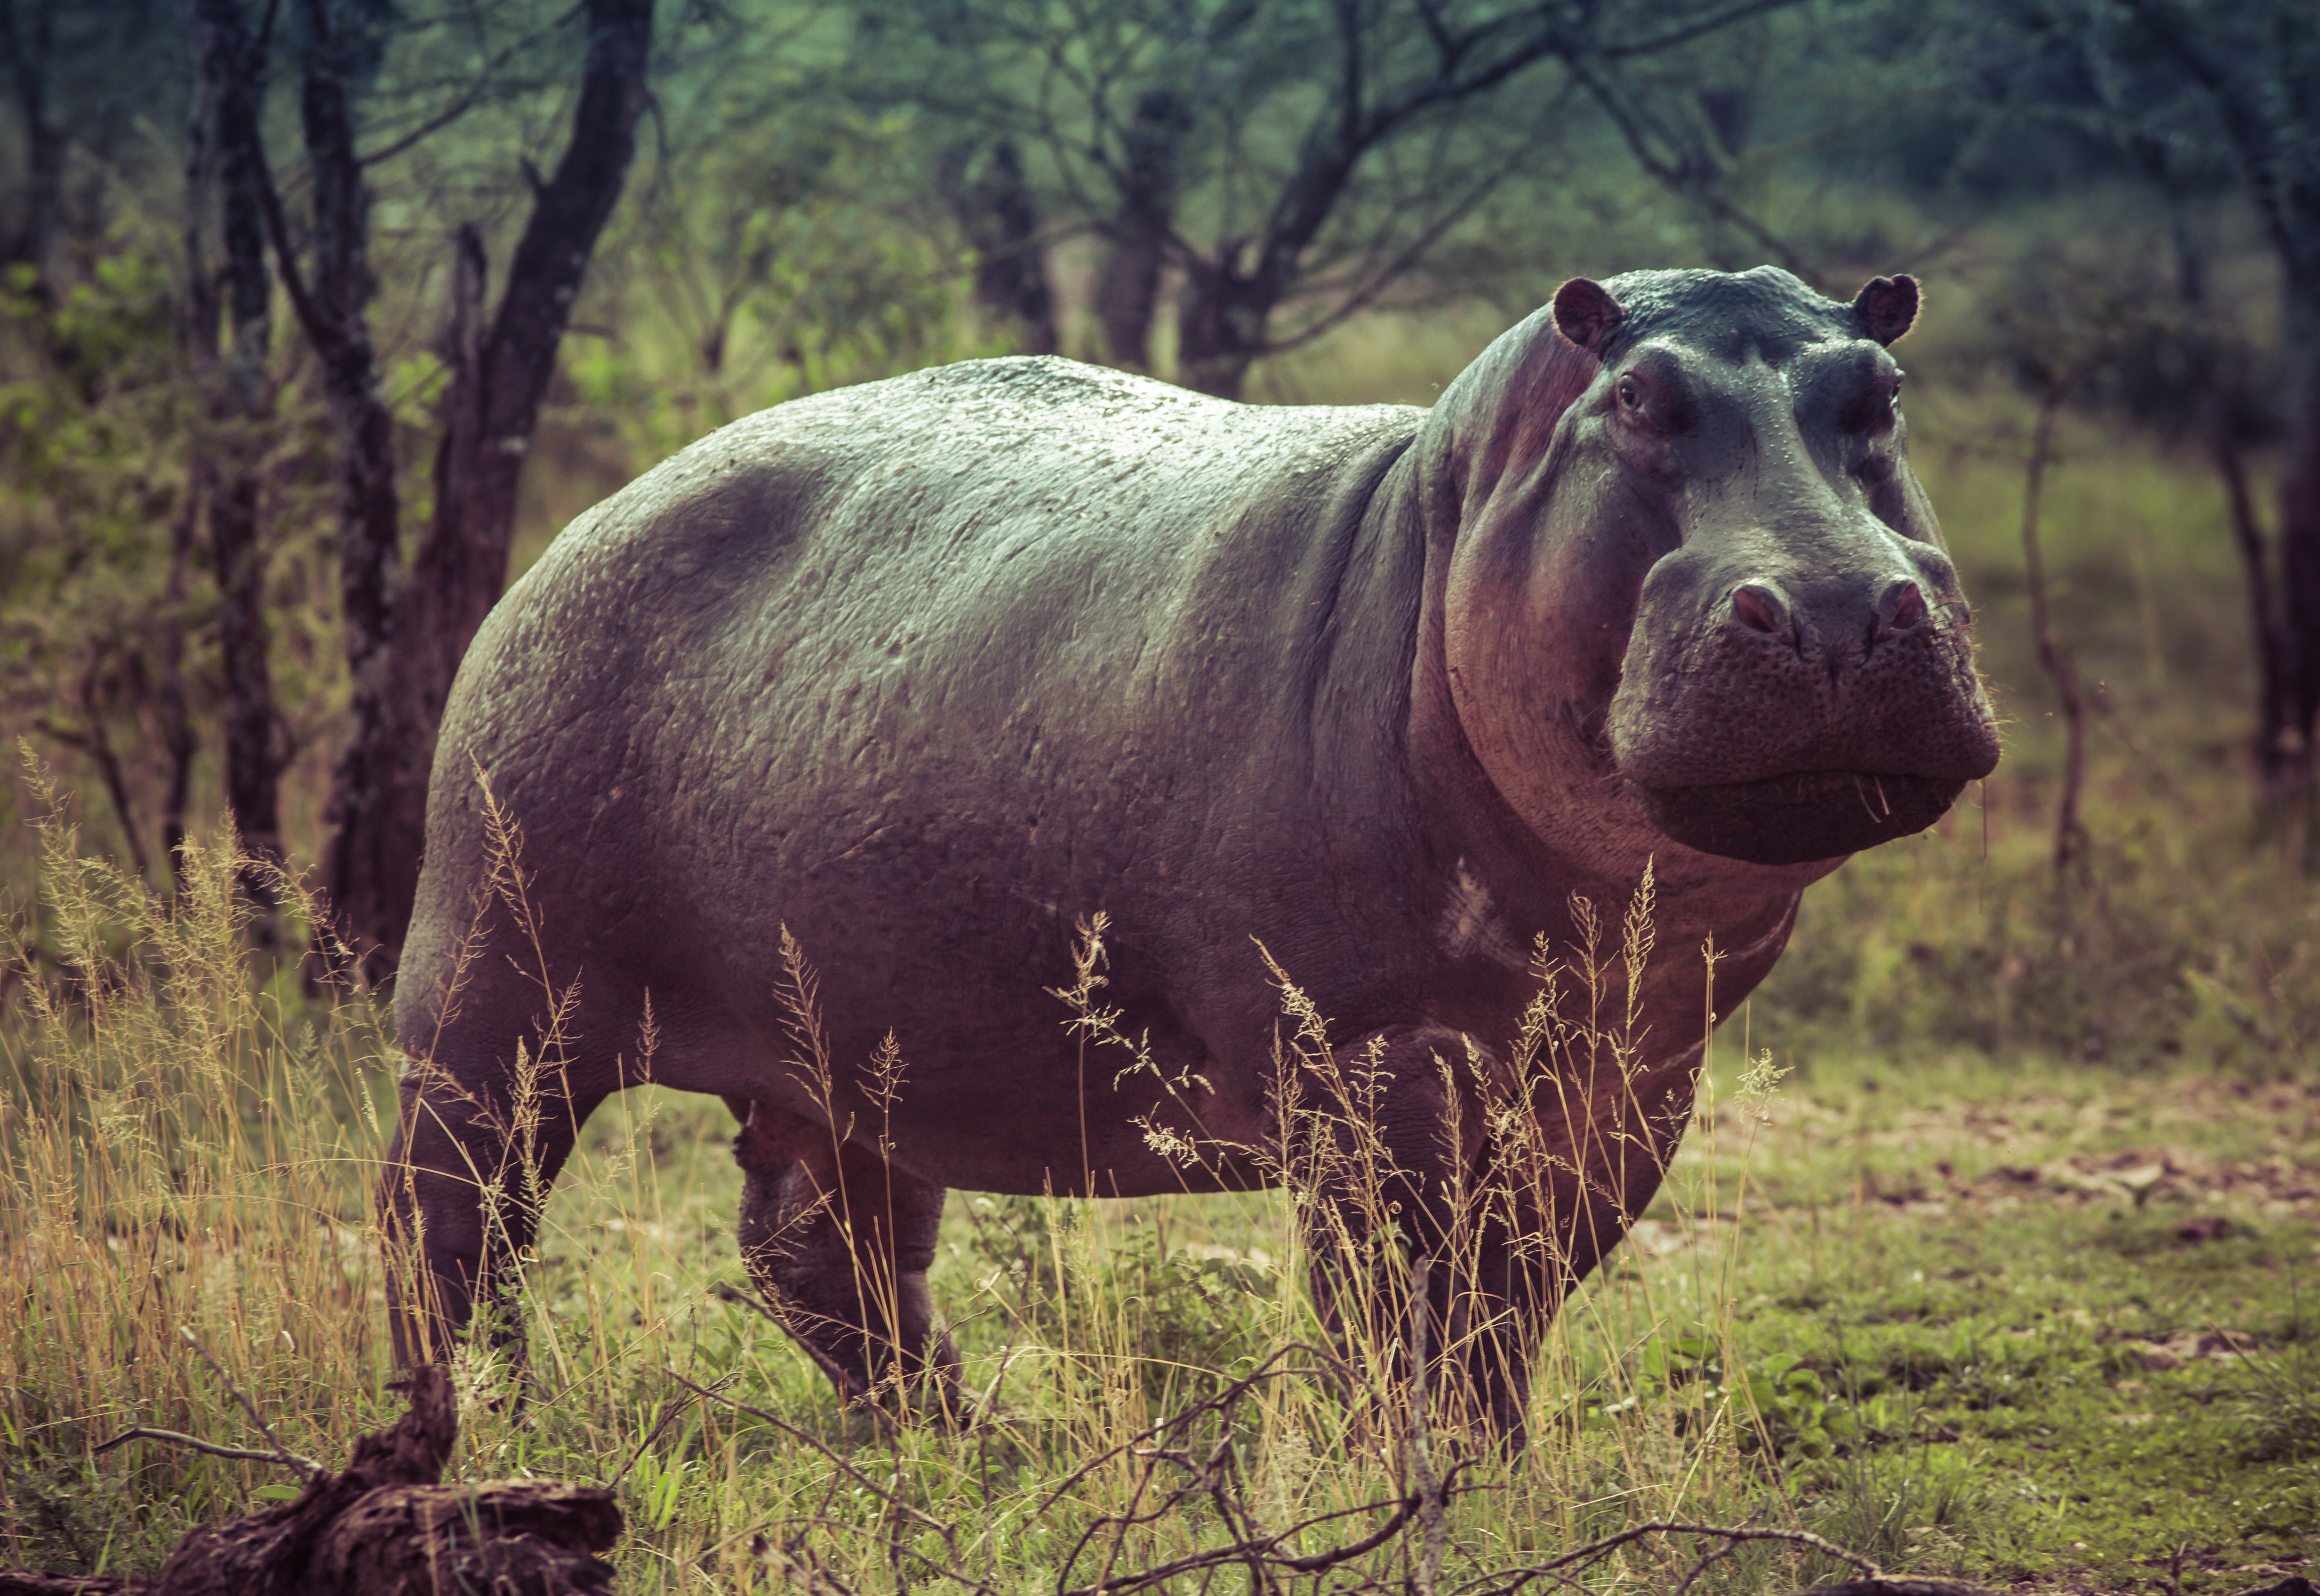 Hippo standing in the grass